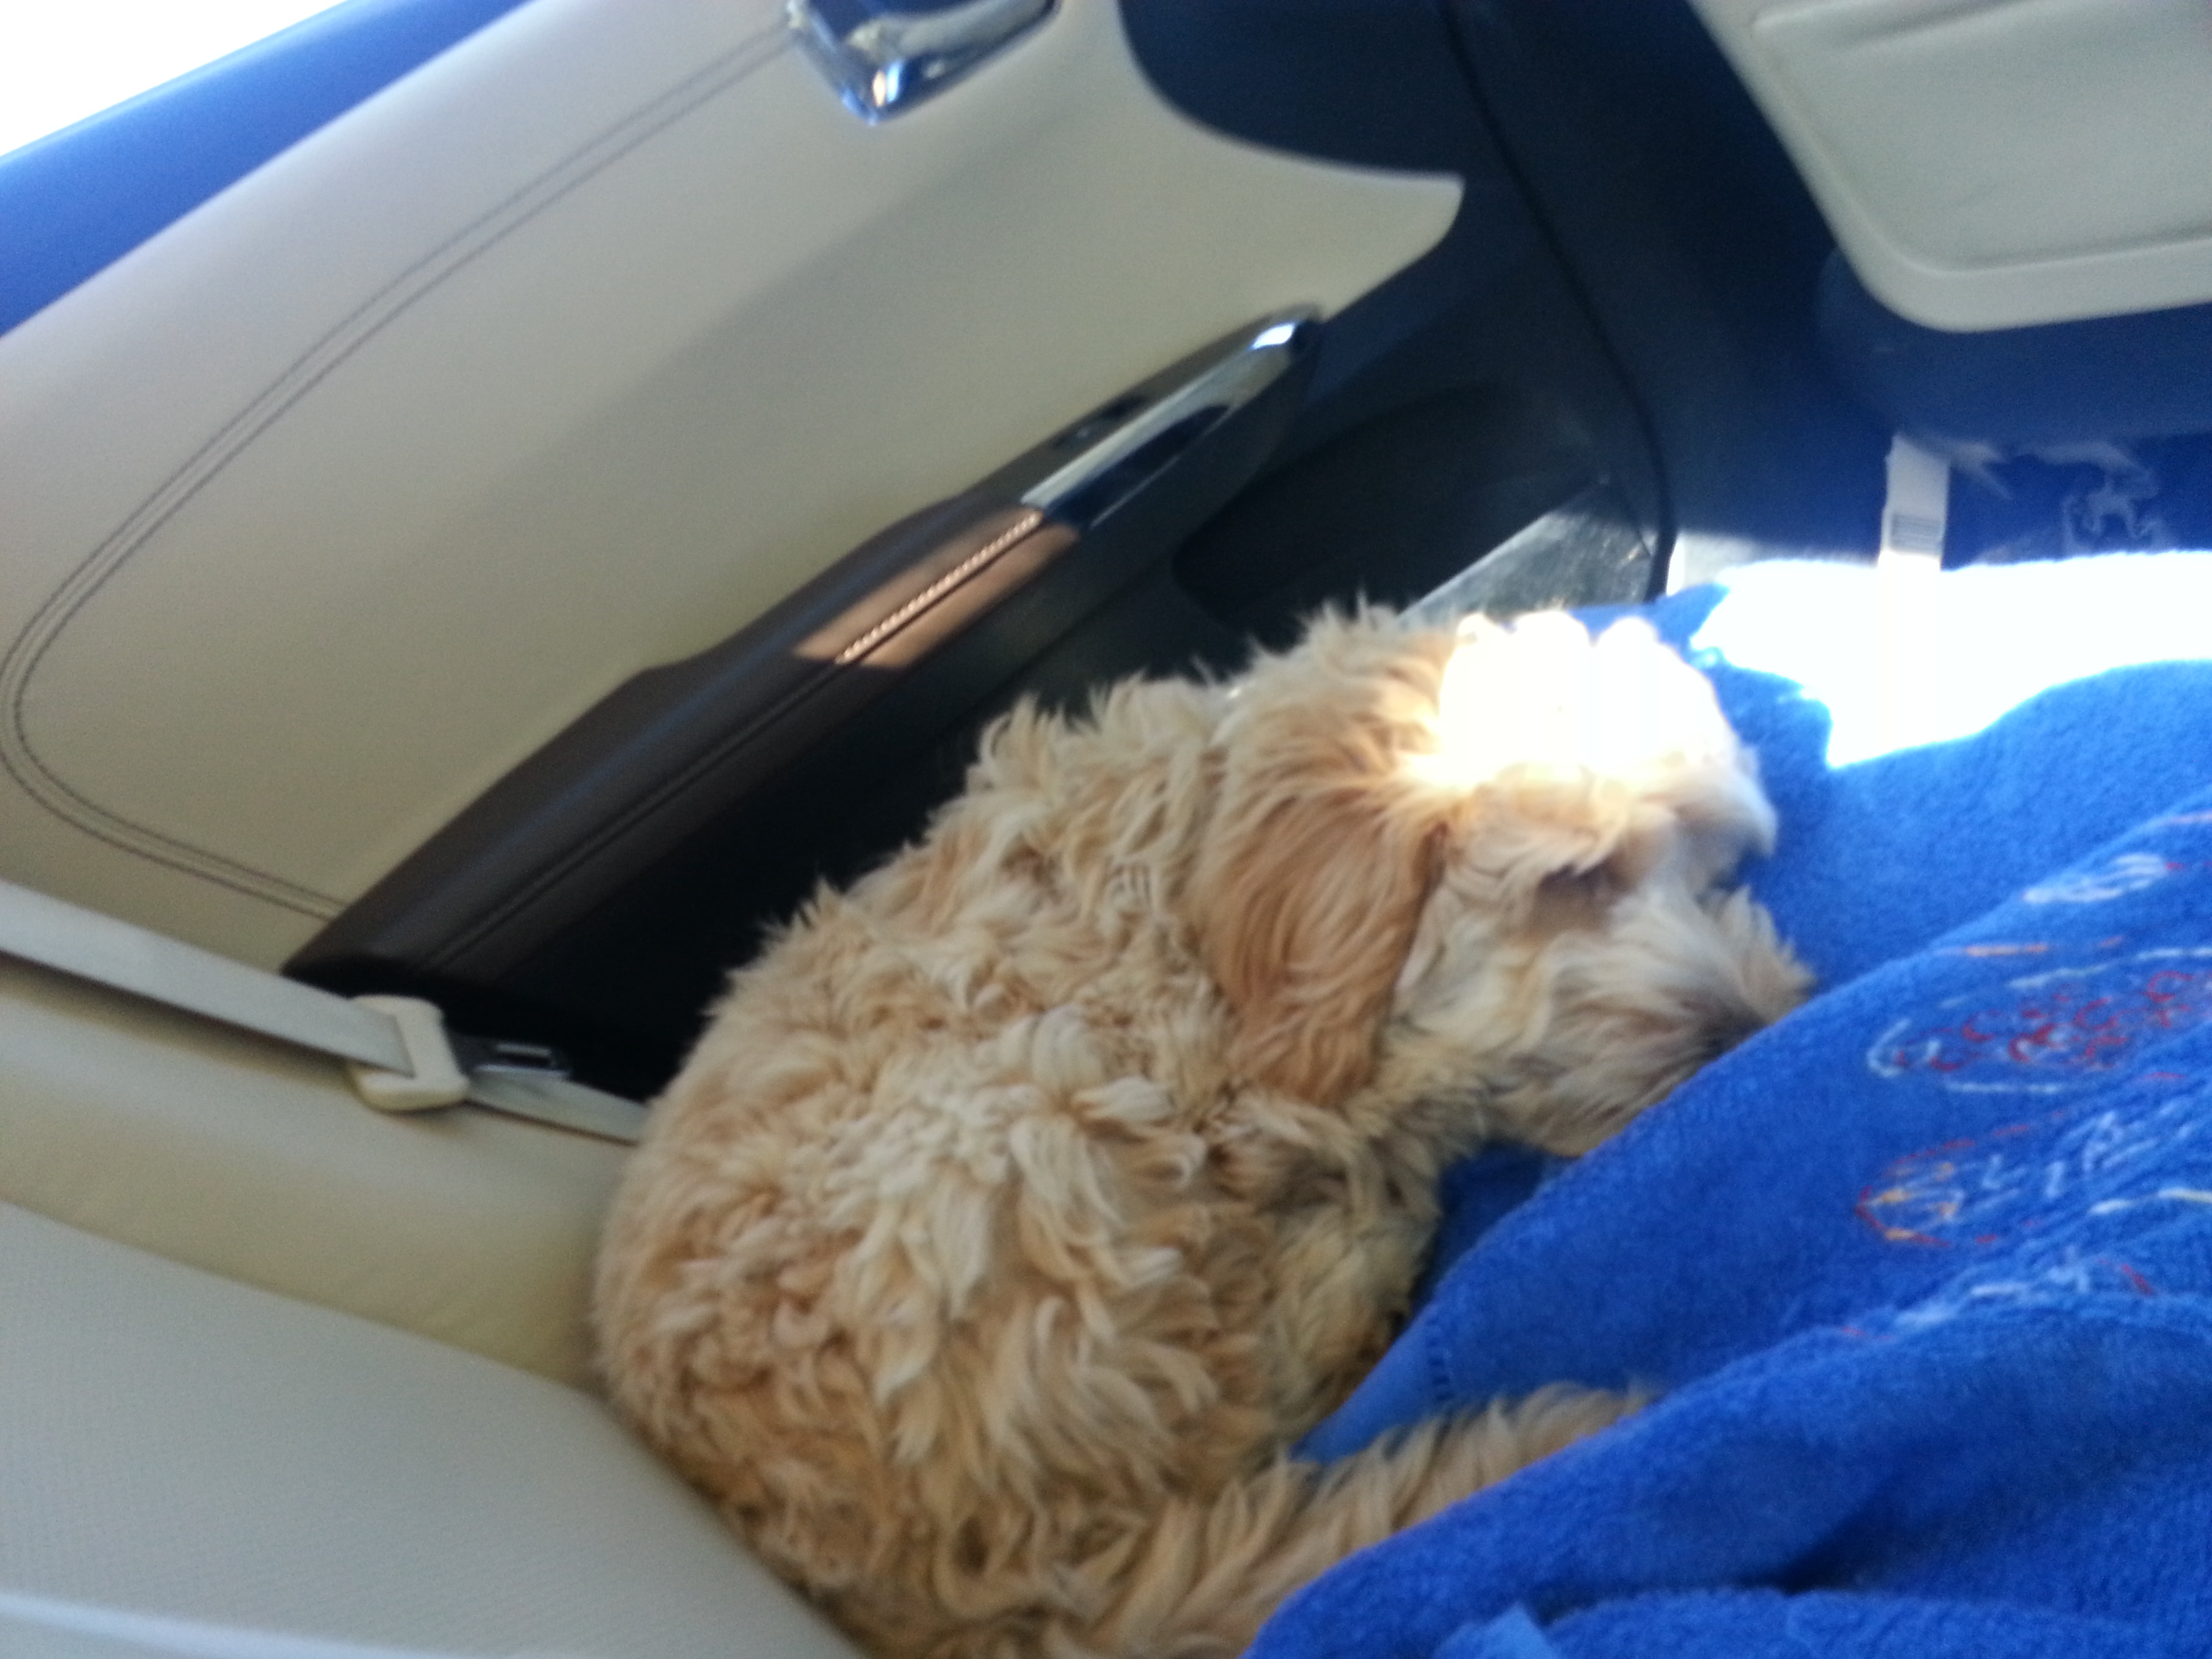 Baby Hachi in the car on a blue towel.